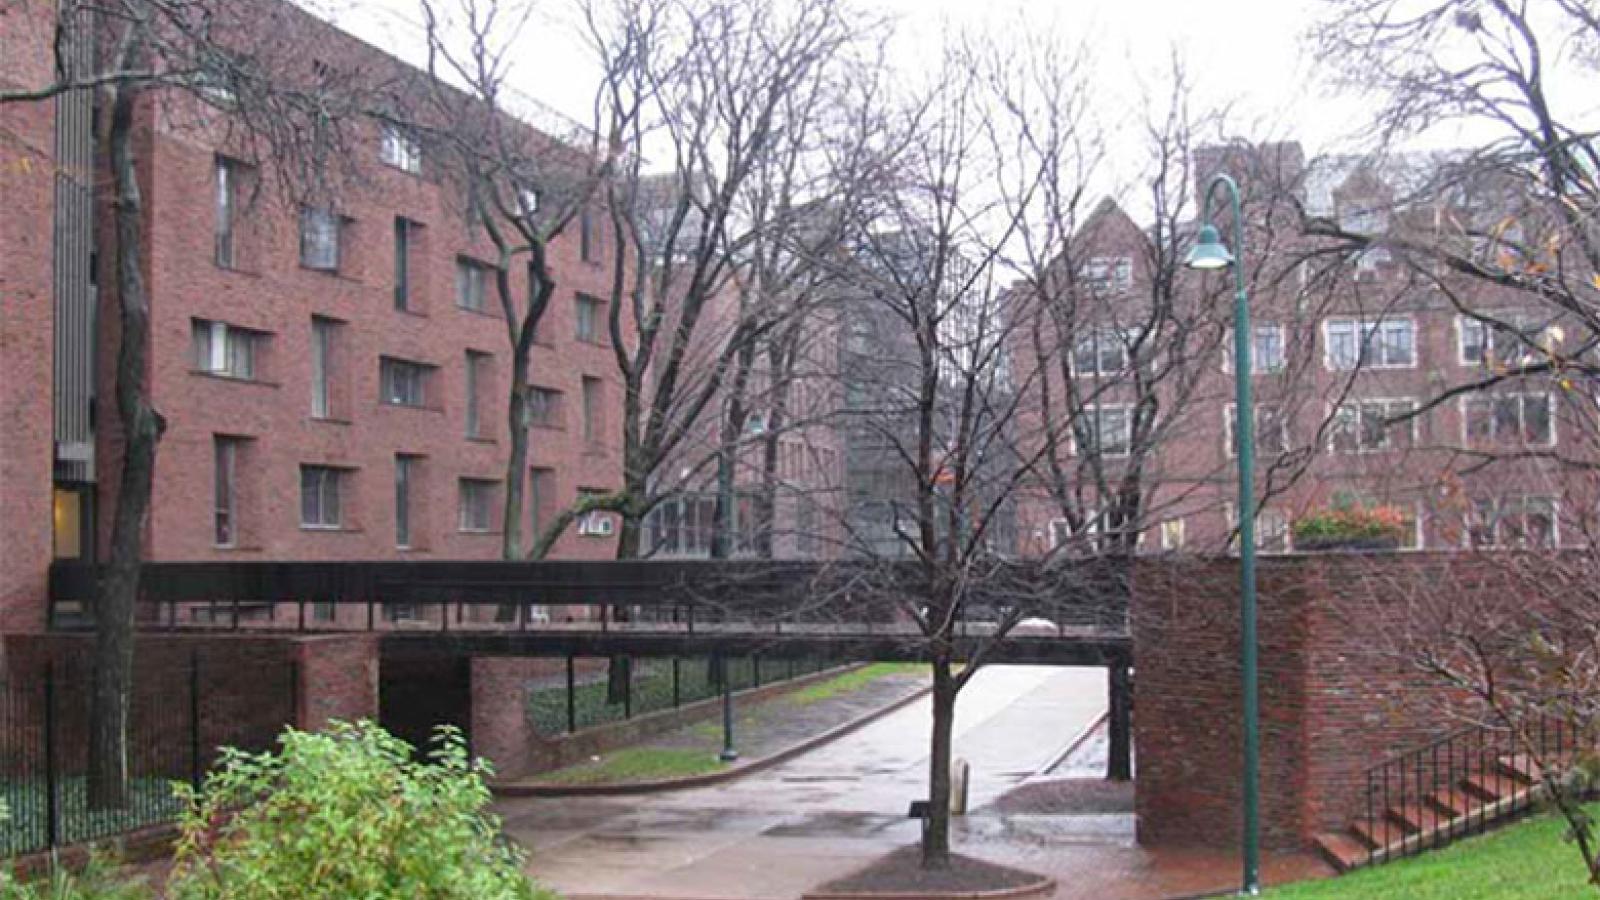 Hill college house existing bridge on west side